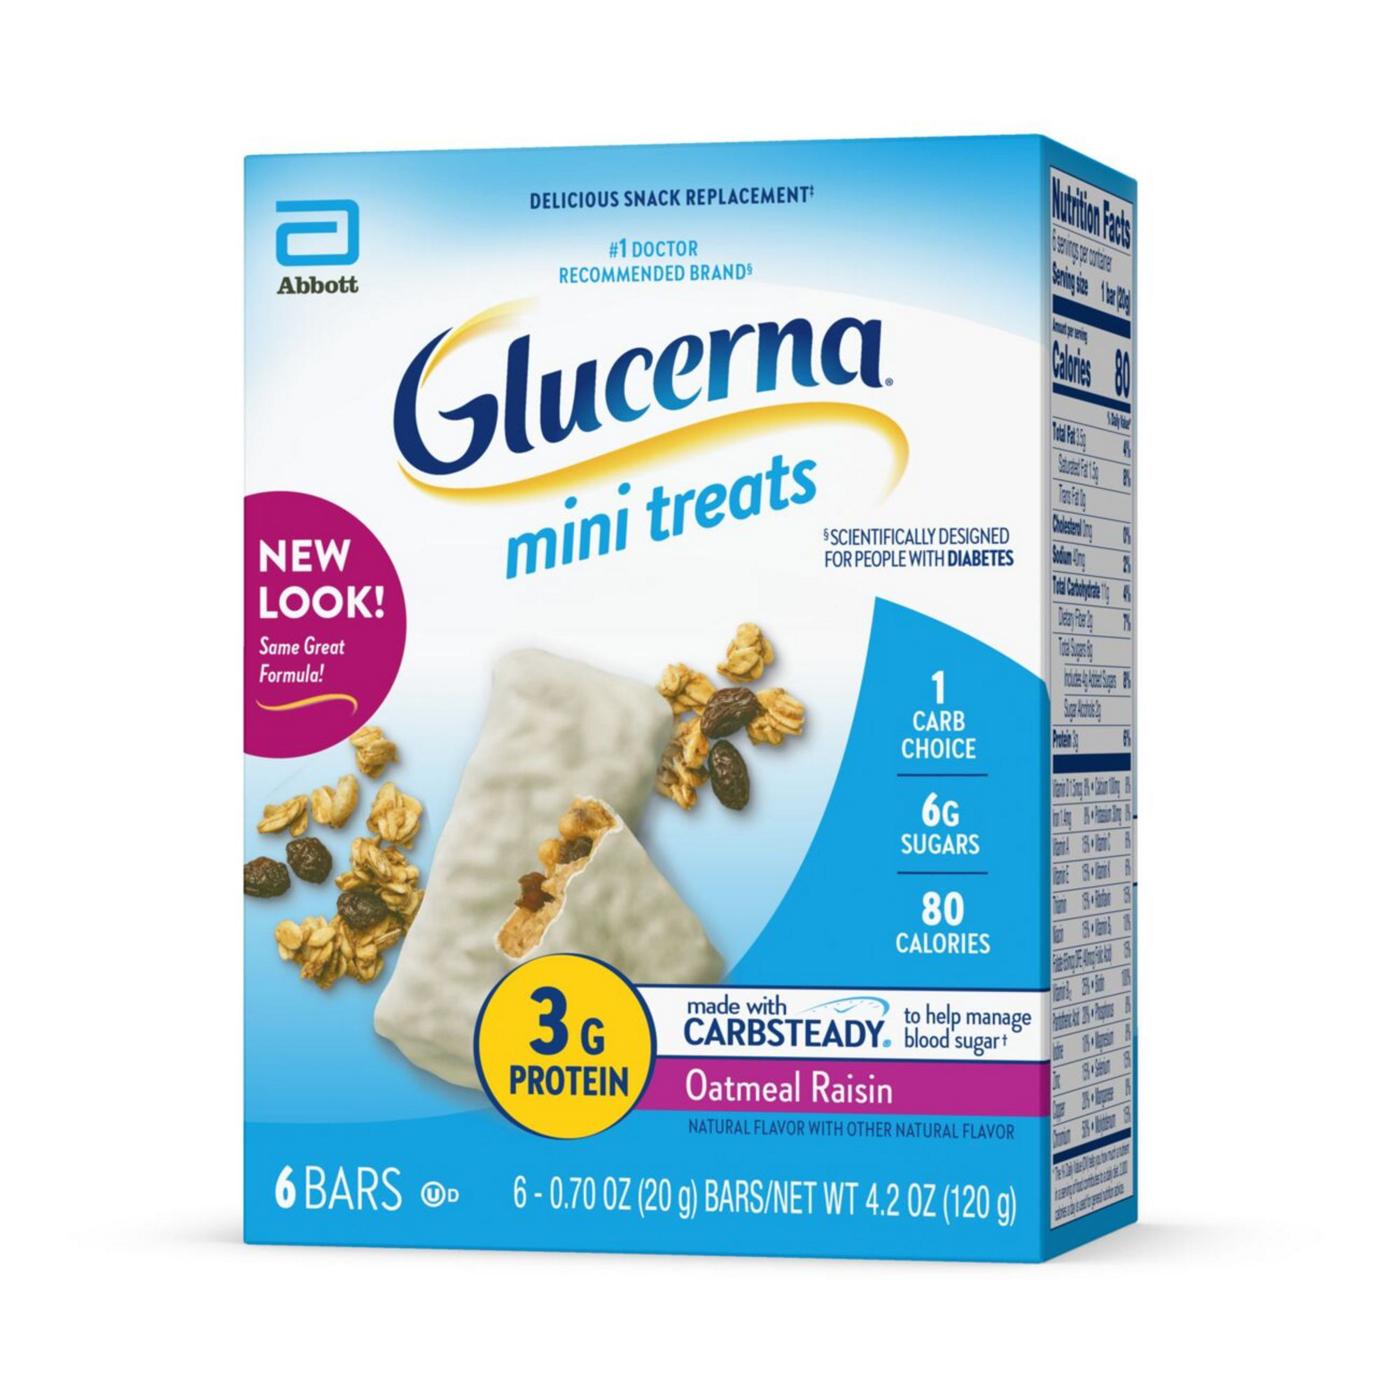 Glucerna Mini Treats, Diabetic Snack Replacement to Support Blood Sugar Management, Oatmeal Raisin; image 5 of 9